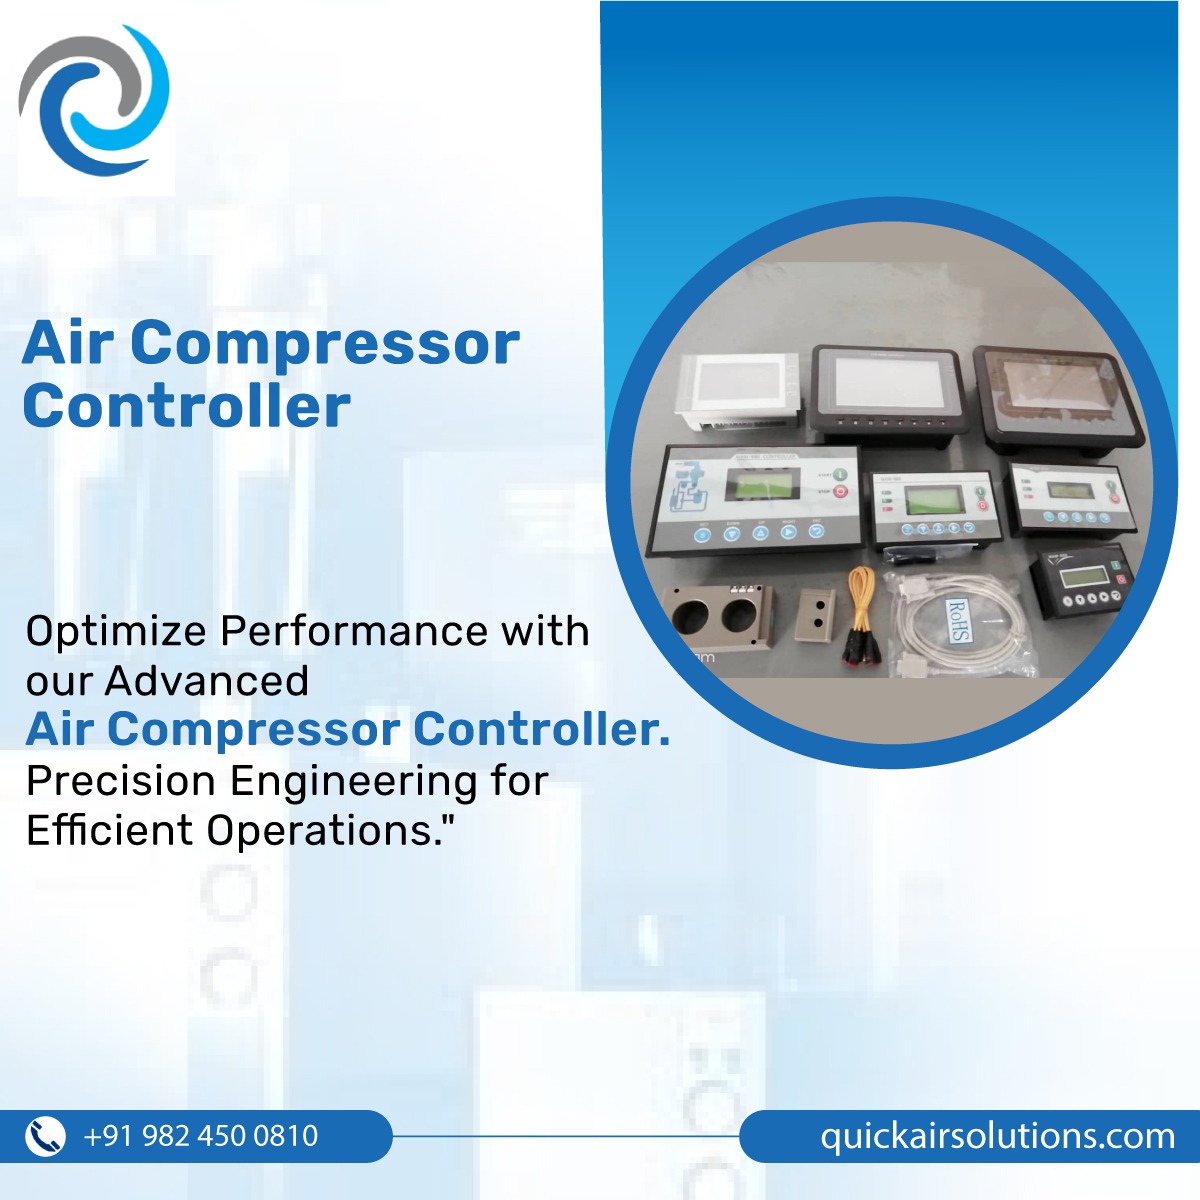 Maximize productivity with our cutting-edge Air Compressor Controller - precision engineering for peak efficiency! 

#quickairsolutions #aircompressorsolutions #MoistureControl #CleanAirSolutions #EfficientPerformance #ahmedabad